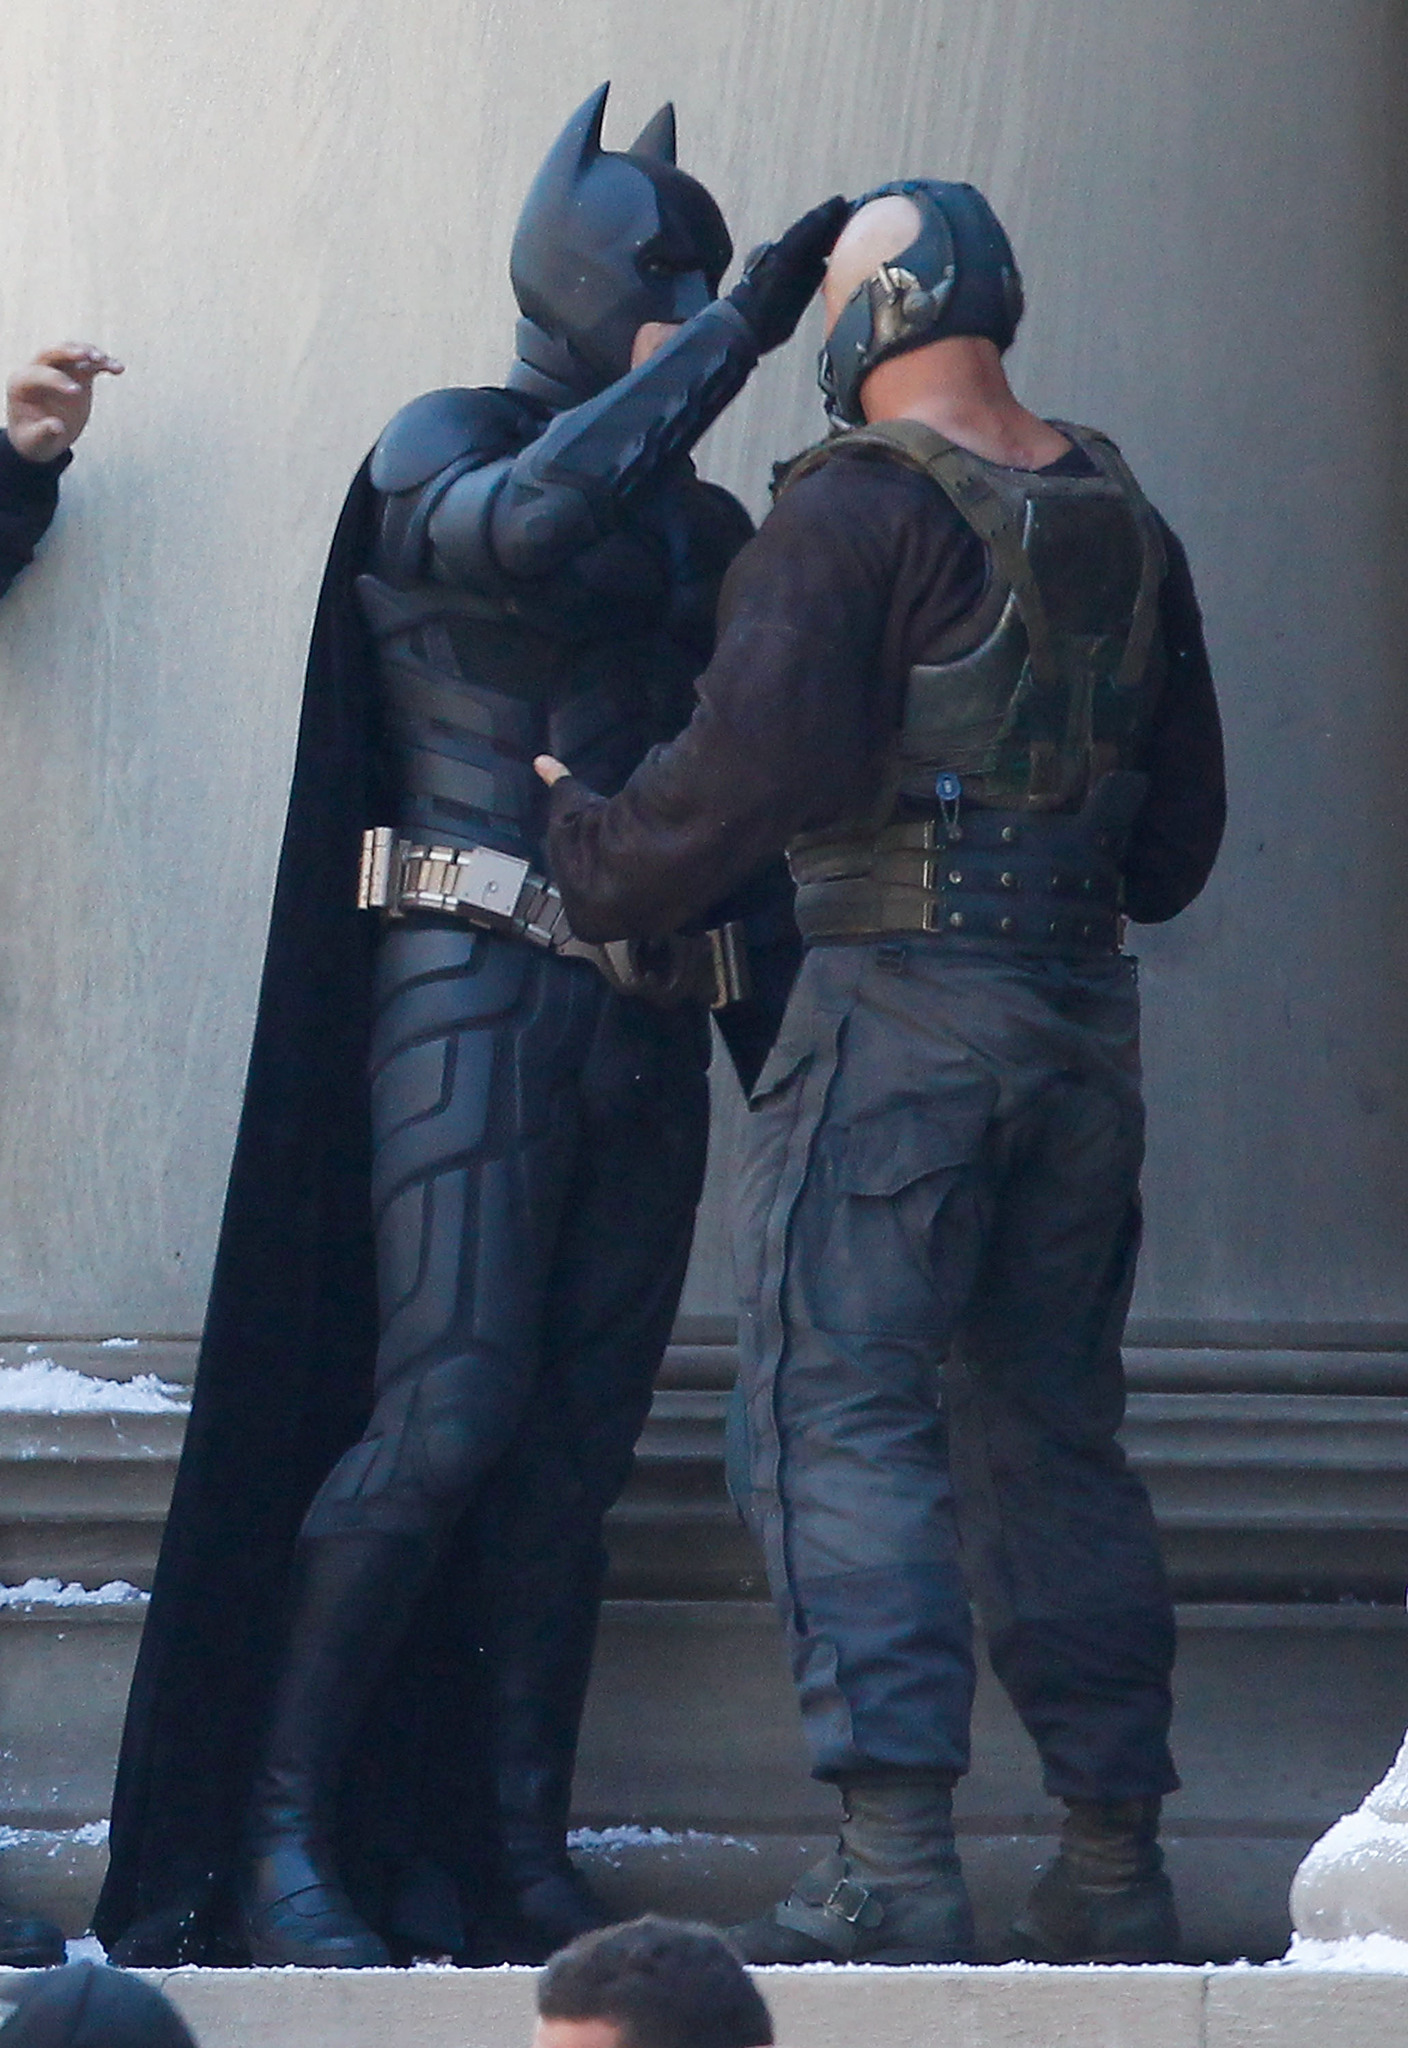 Christian Bale and Tom Hardy in between scenes during the filming of The Dark Knight Rises.